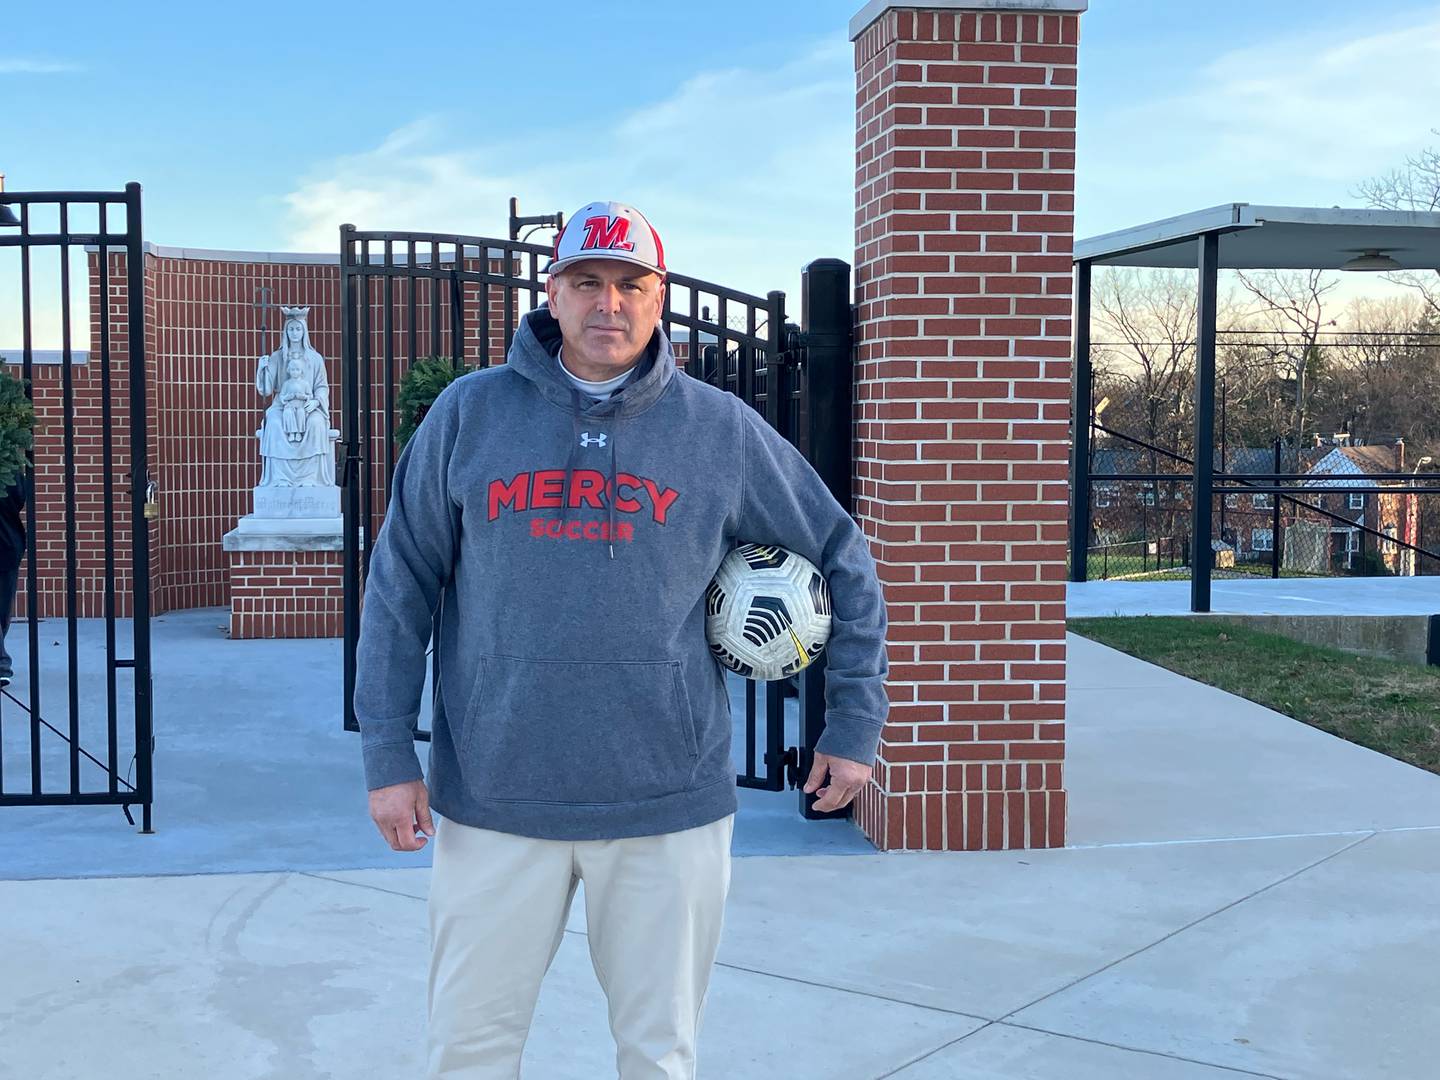 Doug Pryor took Mercy to the top of the Baltimore area girls soccer universe in 2022, winning the IAAM A Conference championship and earning the final No. 1 ranking in the Baltimore Banner/VSN Girls Soccer Top 15. He is our 2022 Coach of the Year.